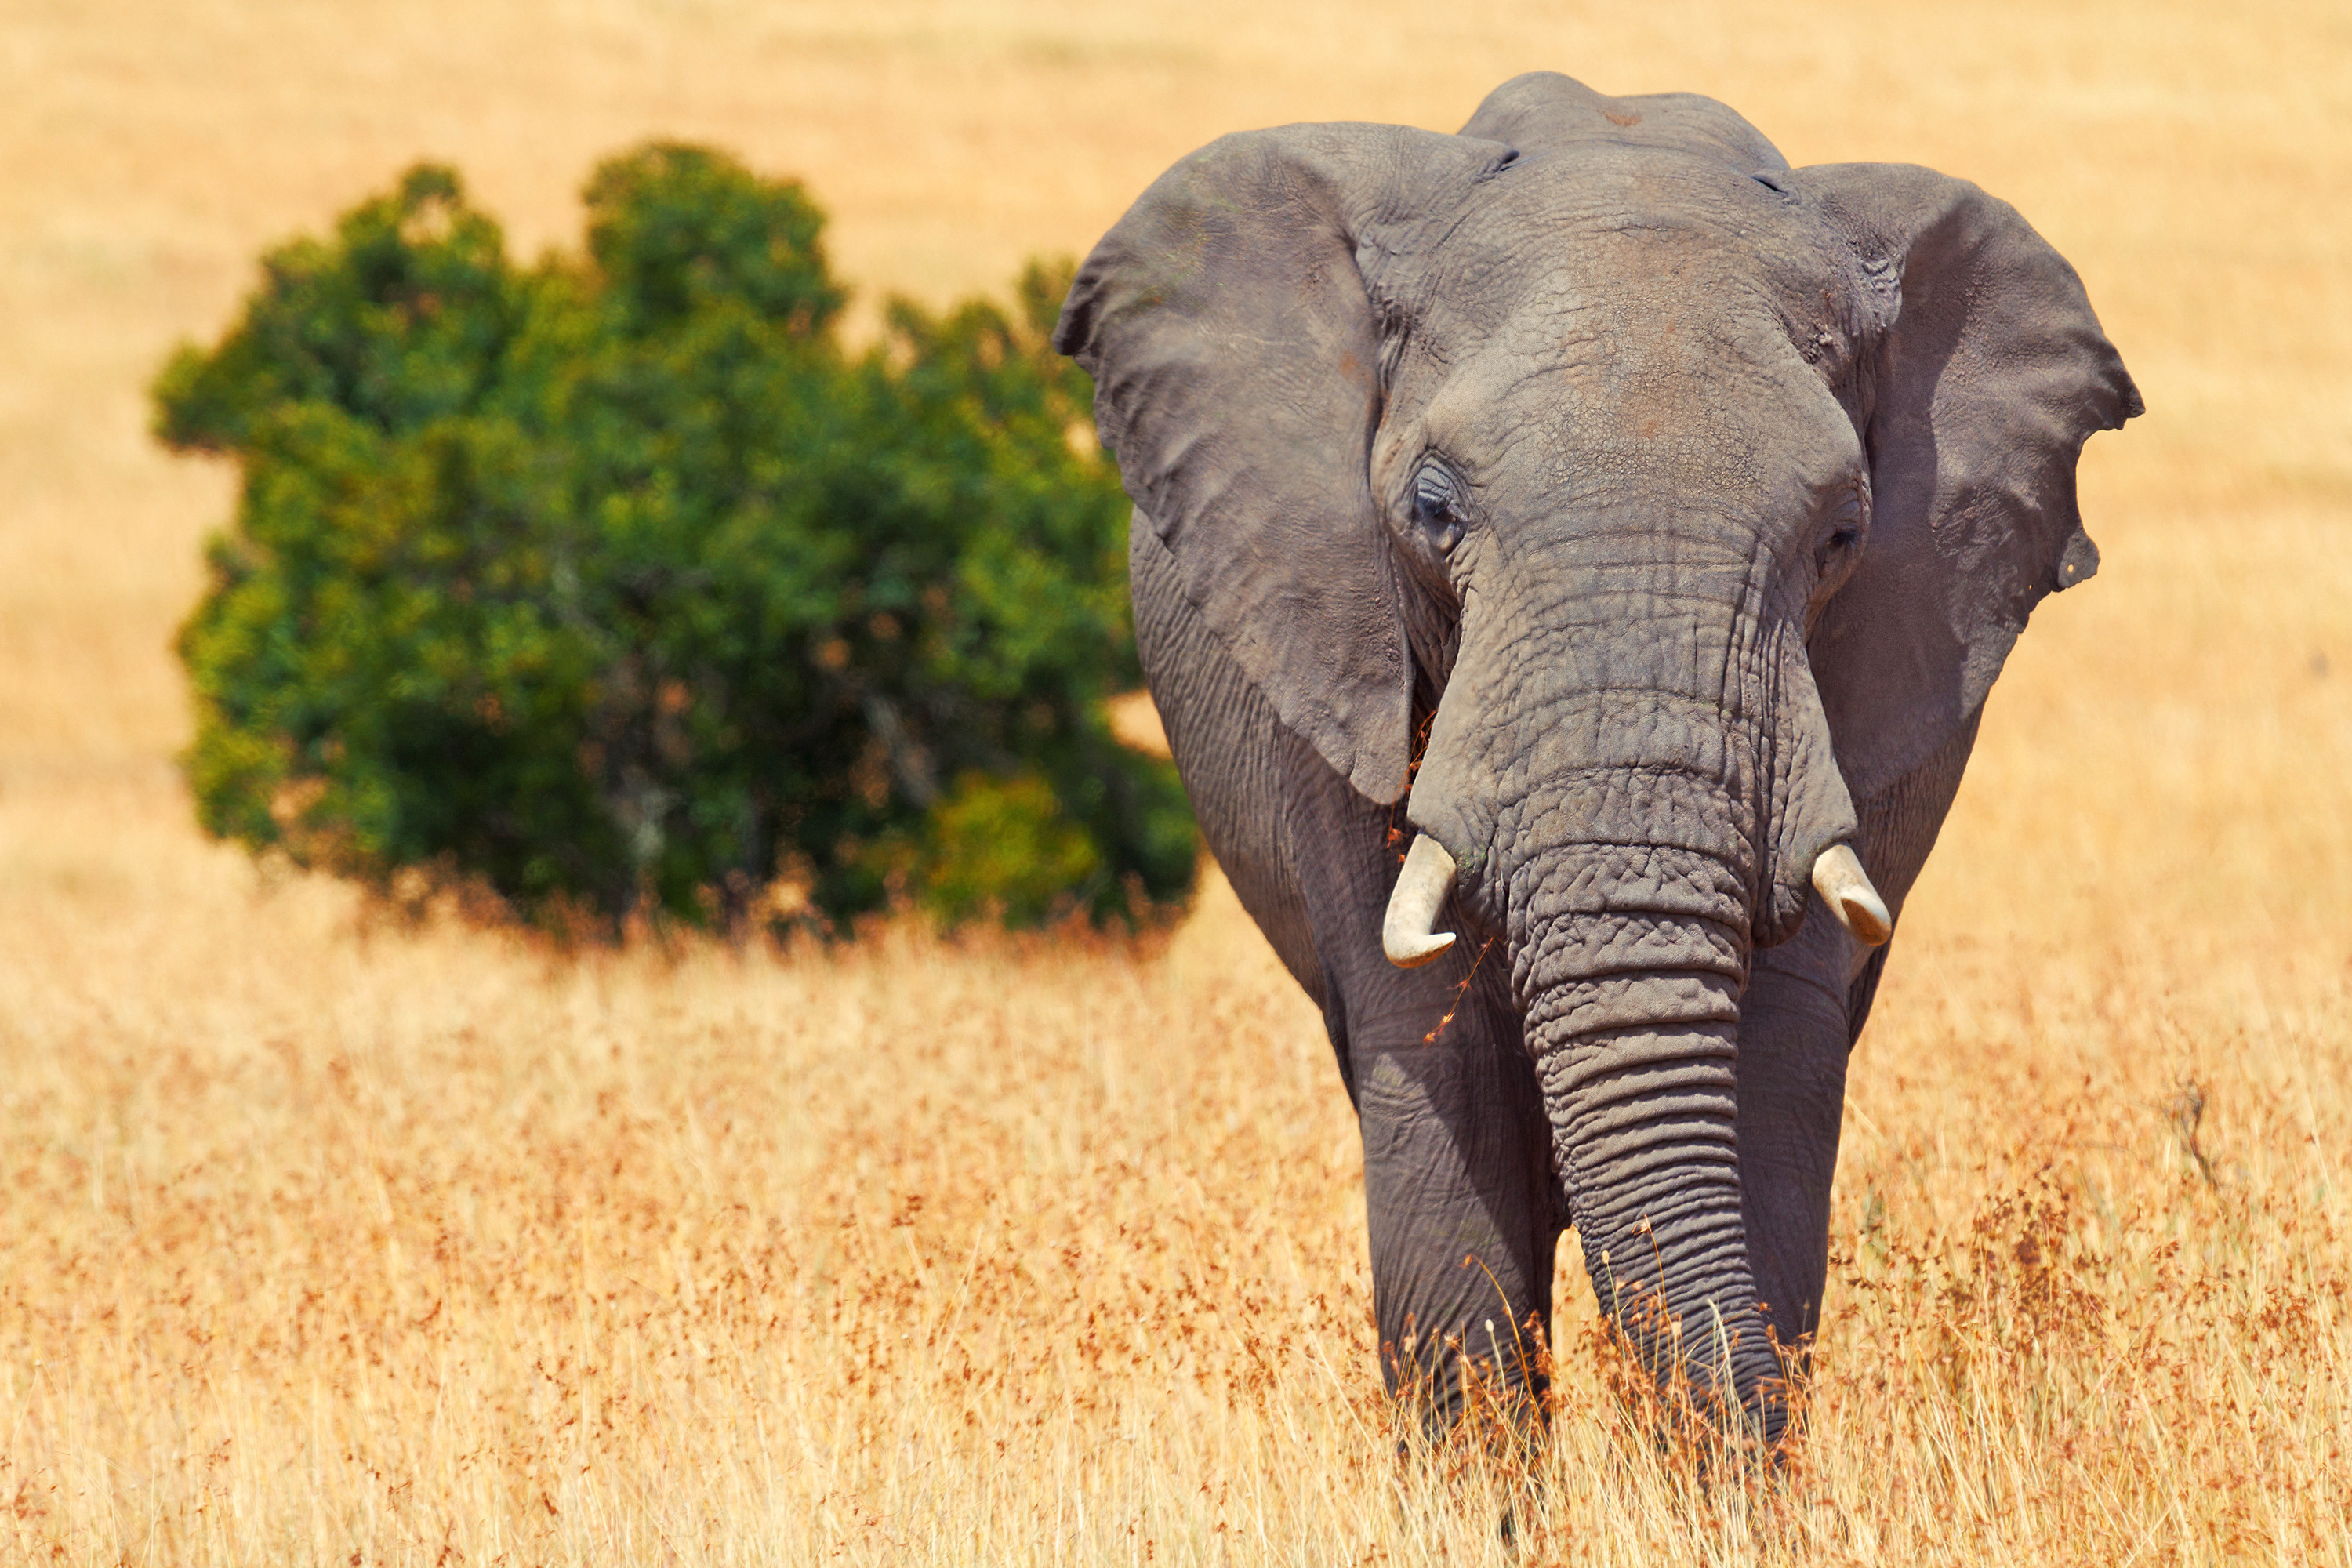 Hunter trampled to death by elephant he was trying to kill